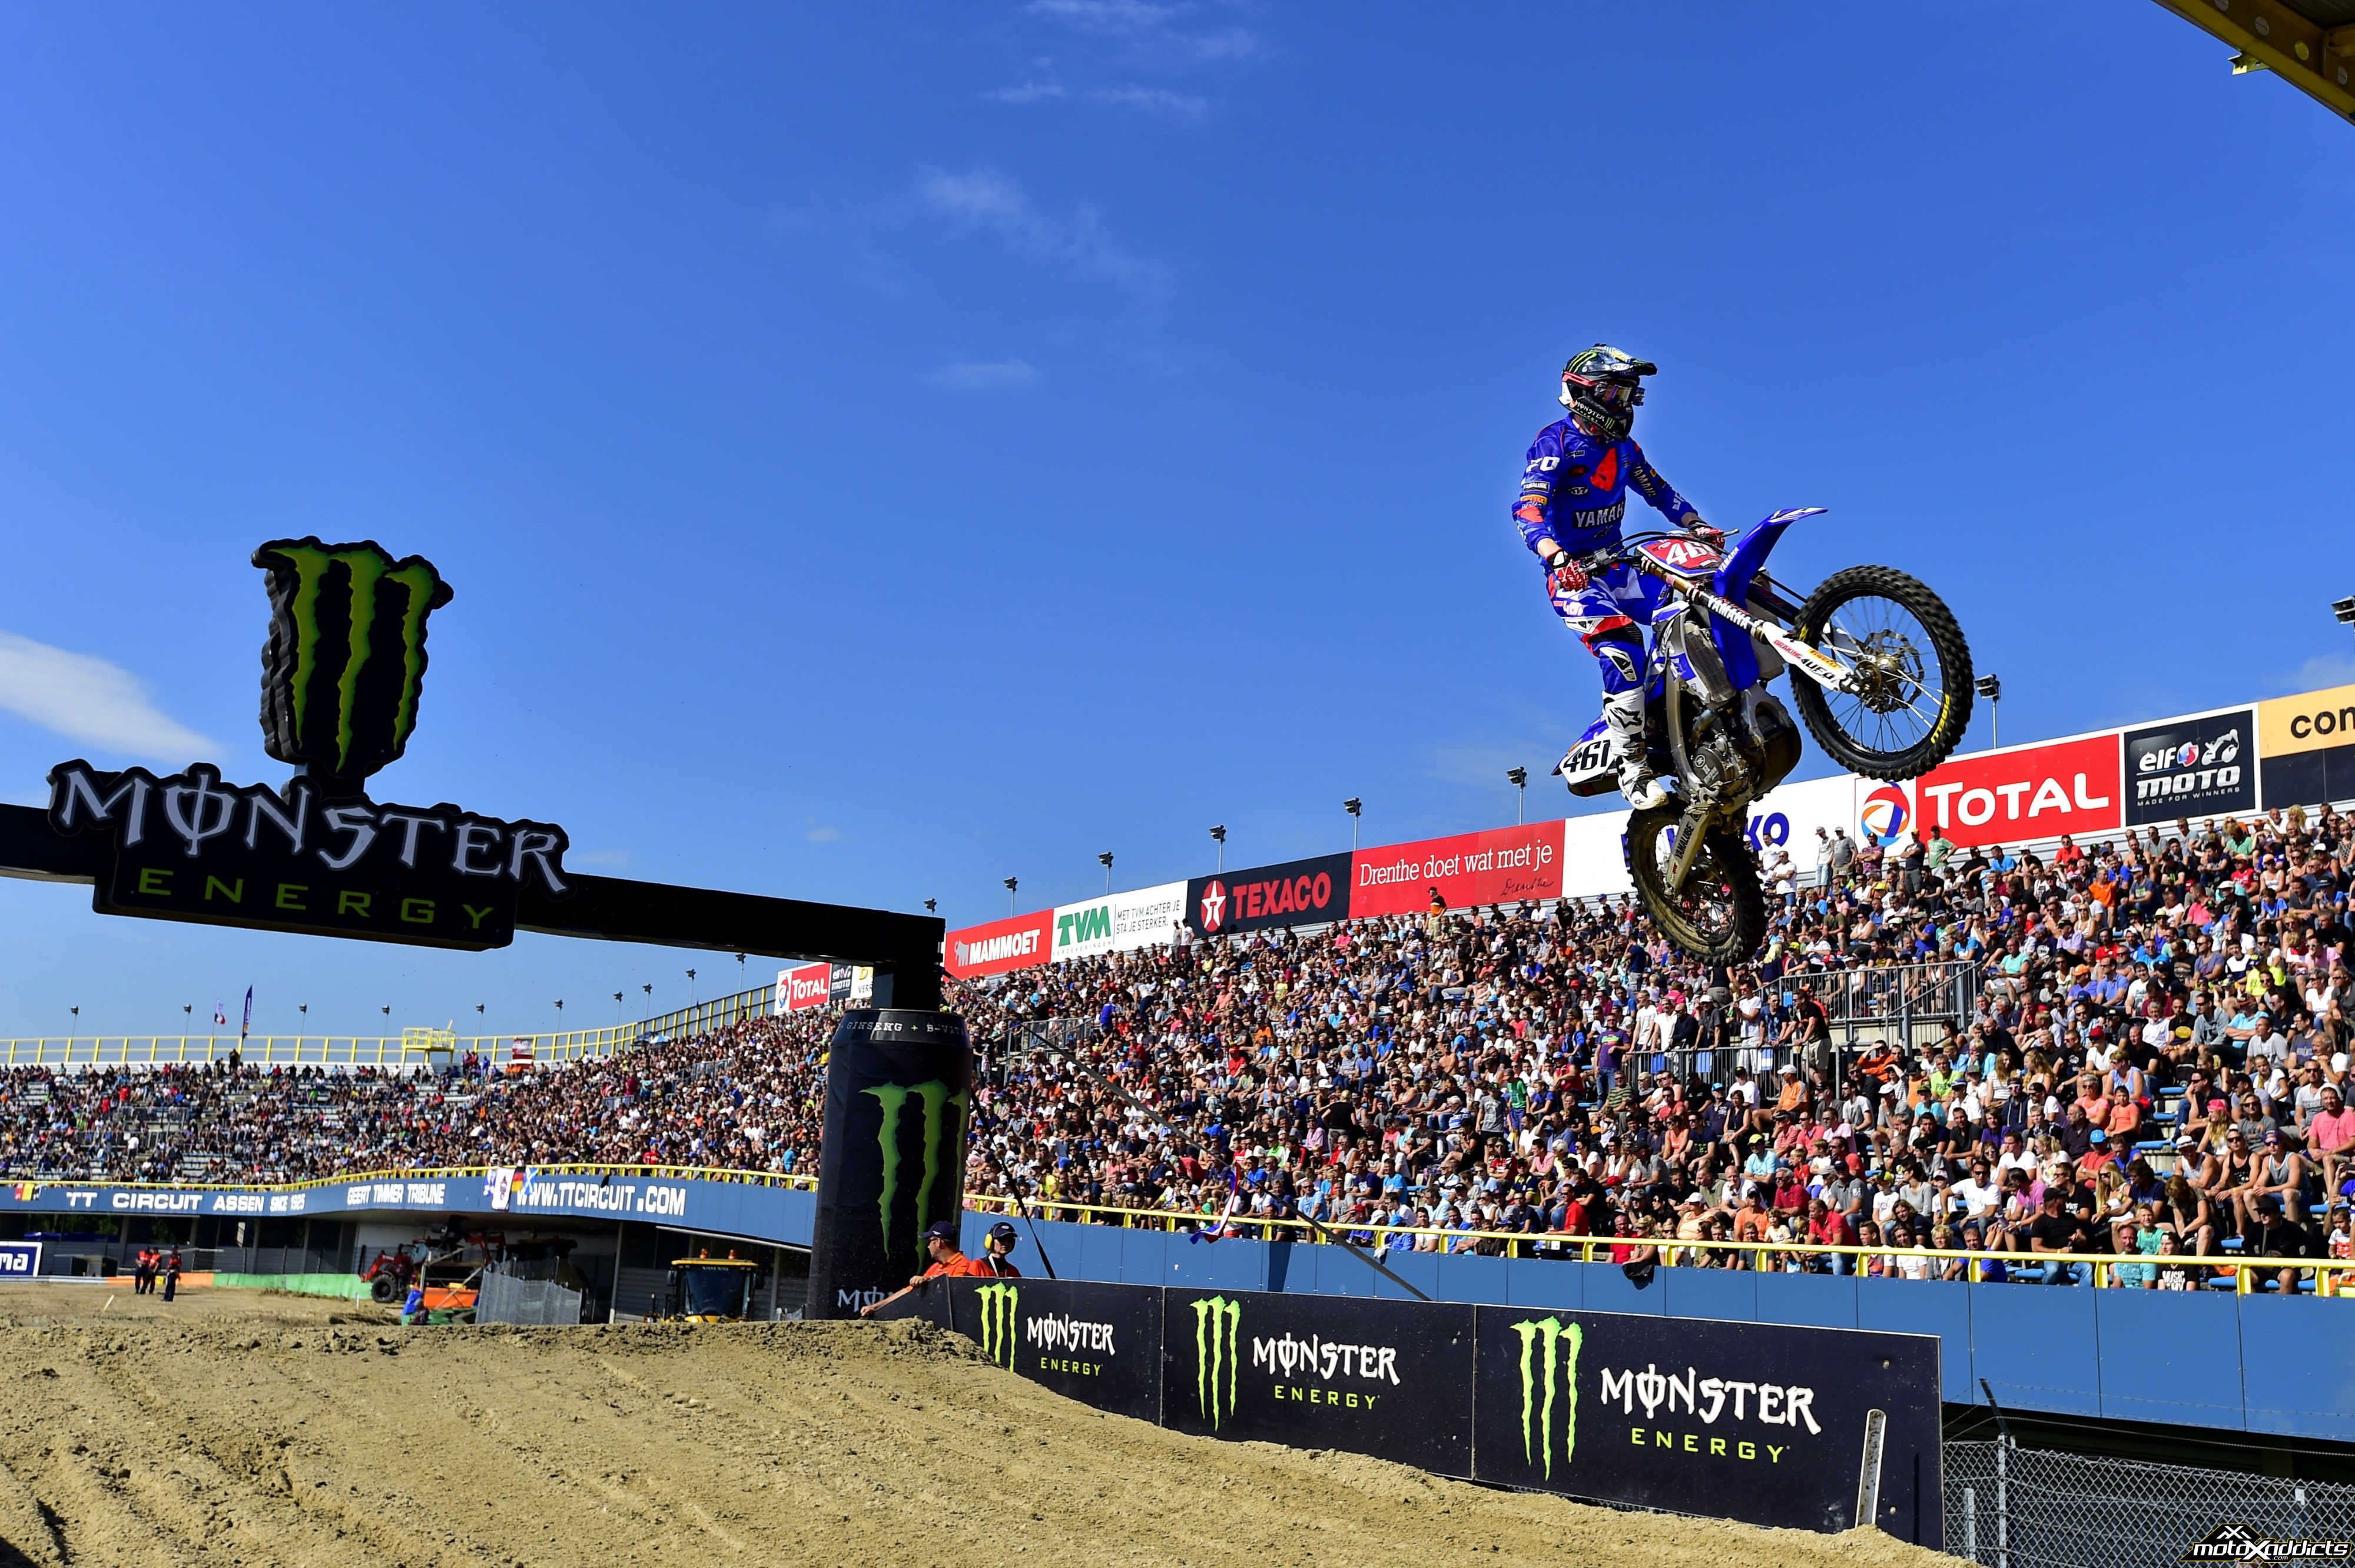 Romain clinched the MXGP World Championship after winning the second moto in Assen.